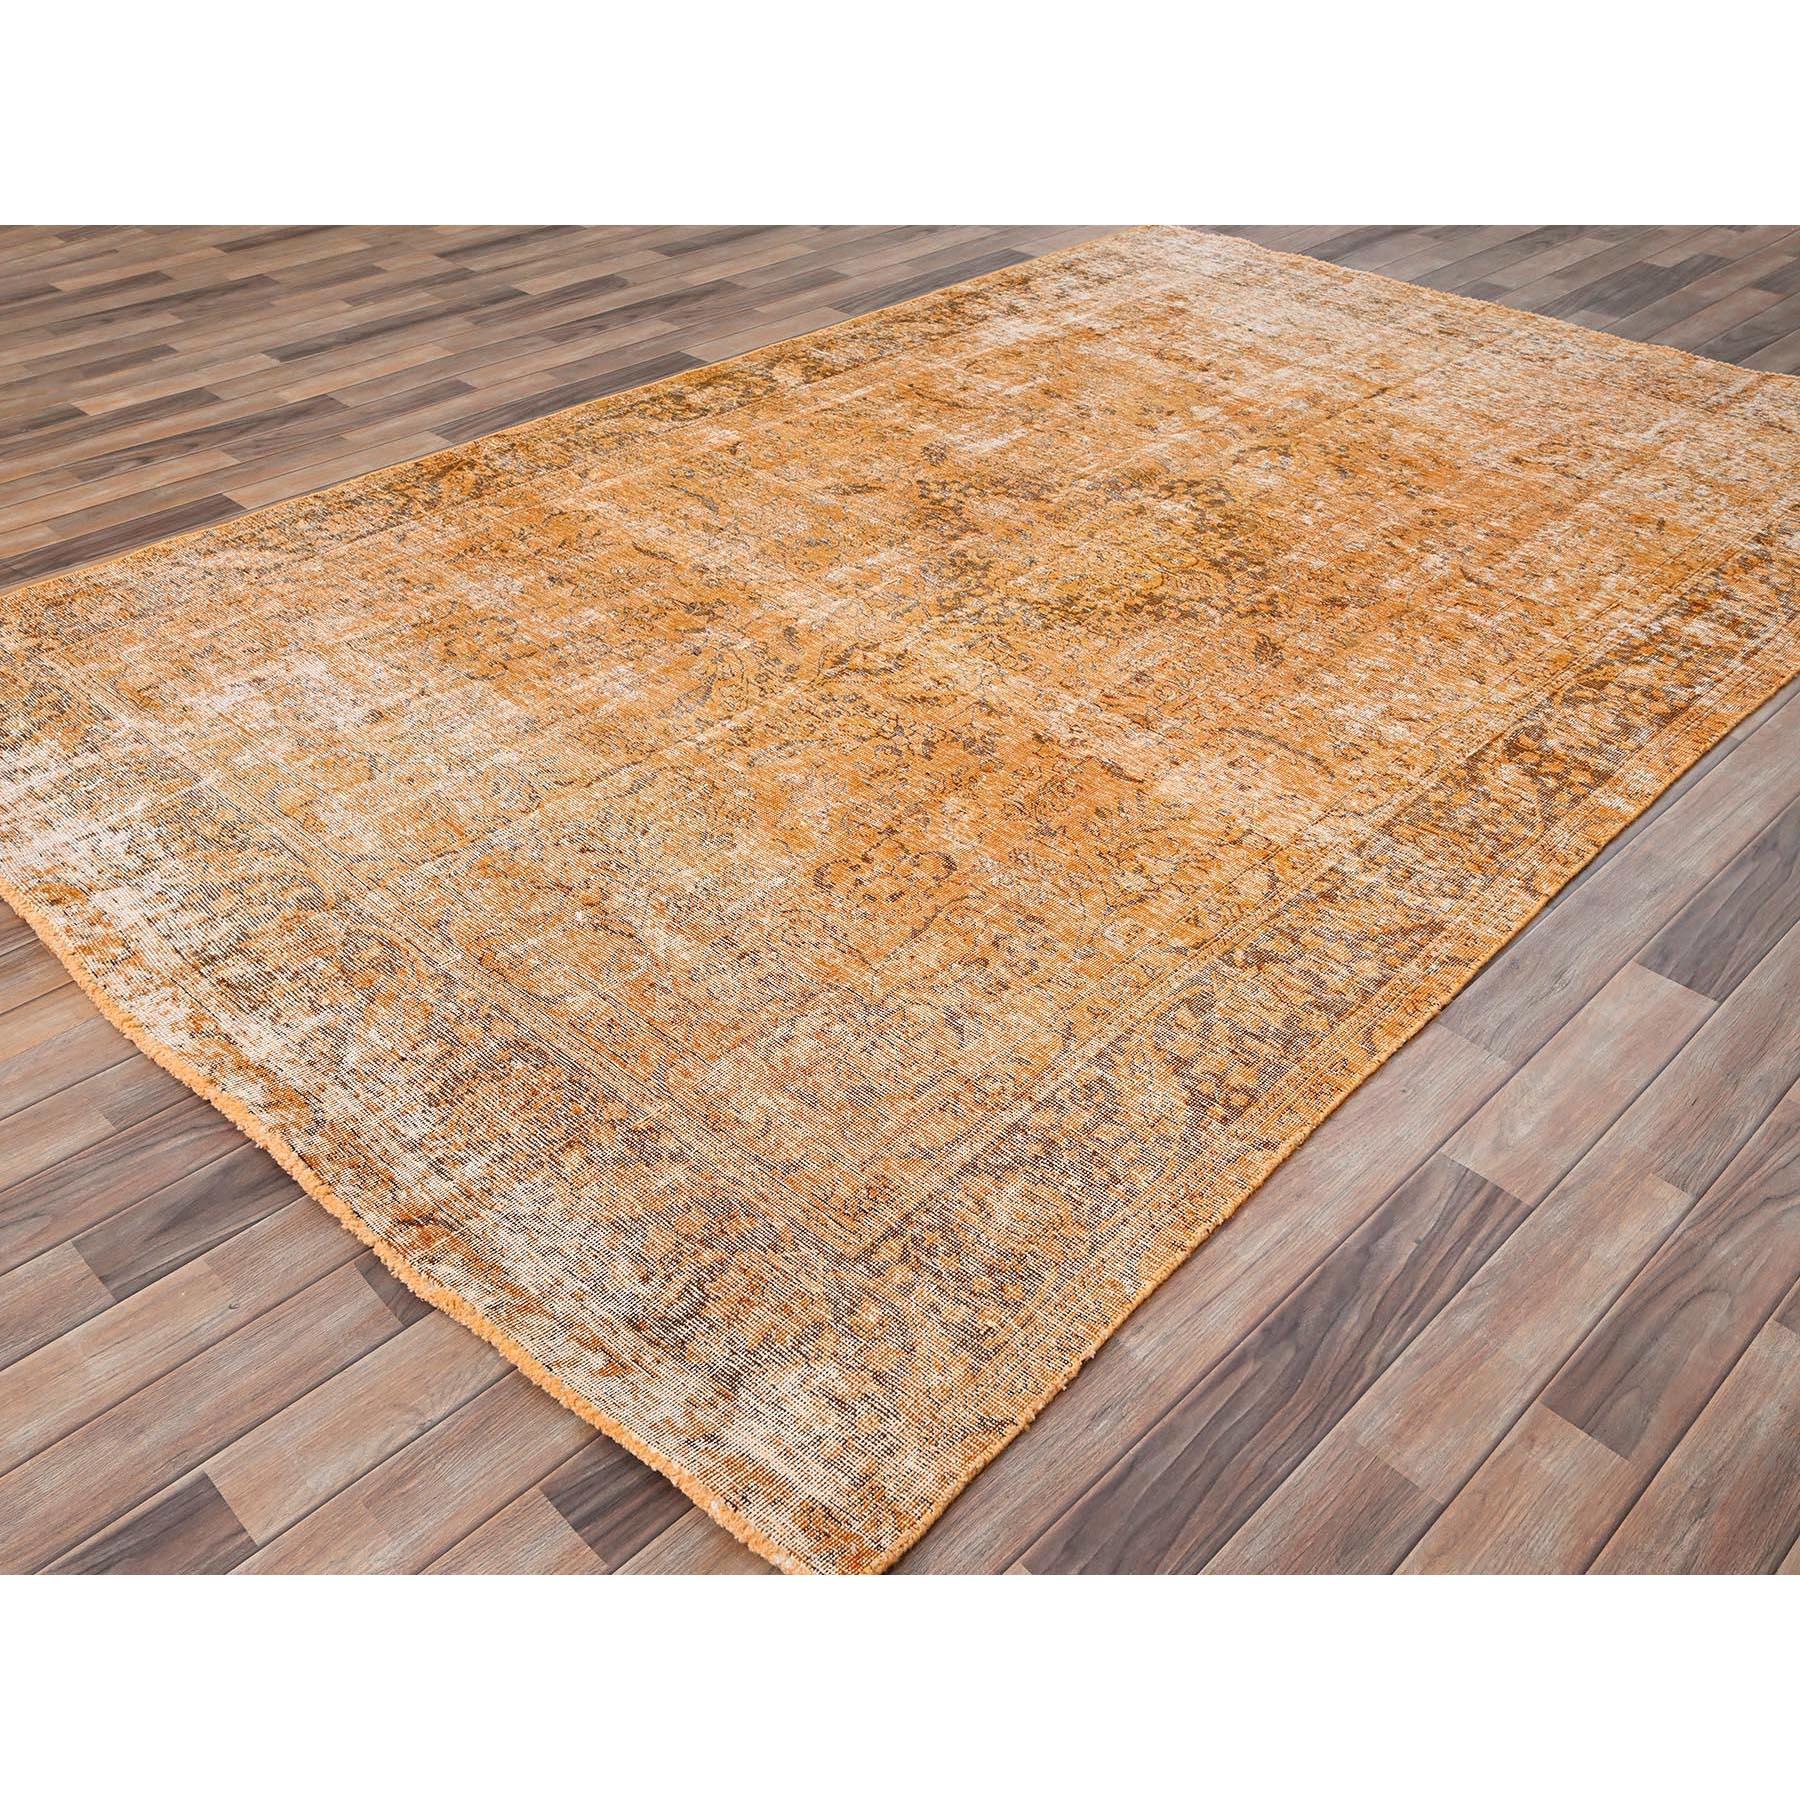 Carrot Orange Rustic Look Soft Wool Hand Knotted Vintage Persian Tabriz Rug In Fair Condition For Sale In Carlstadt, NJ